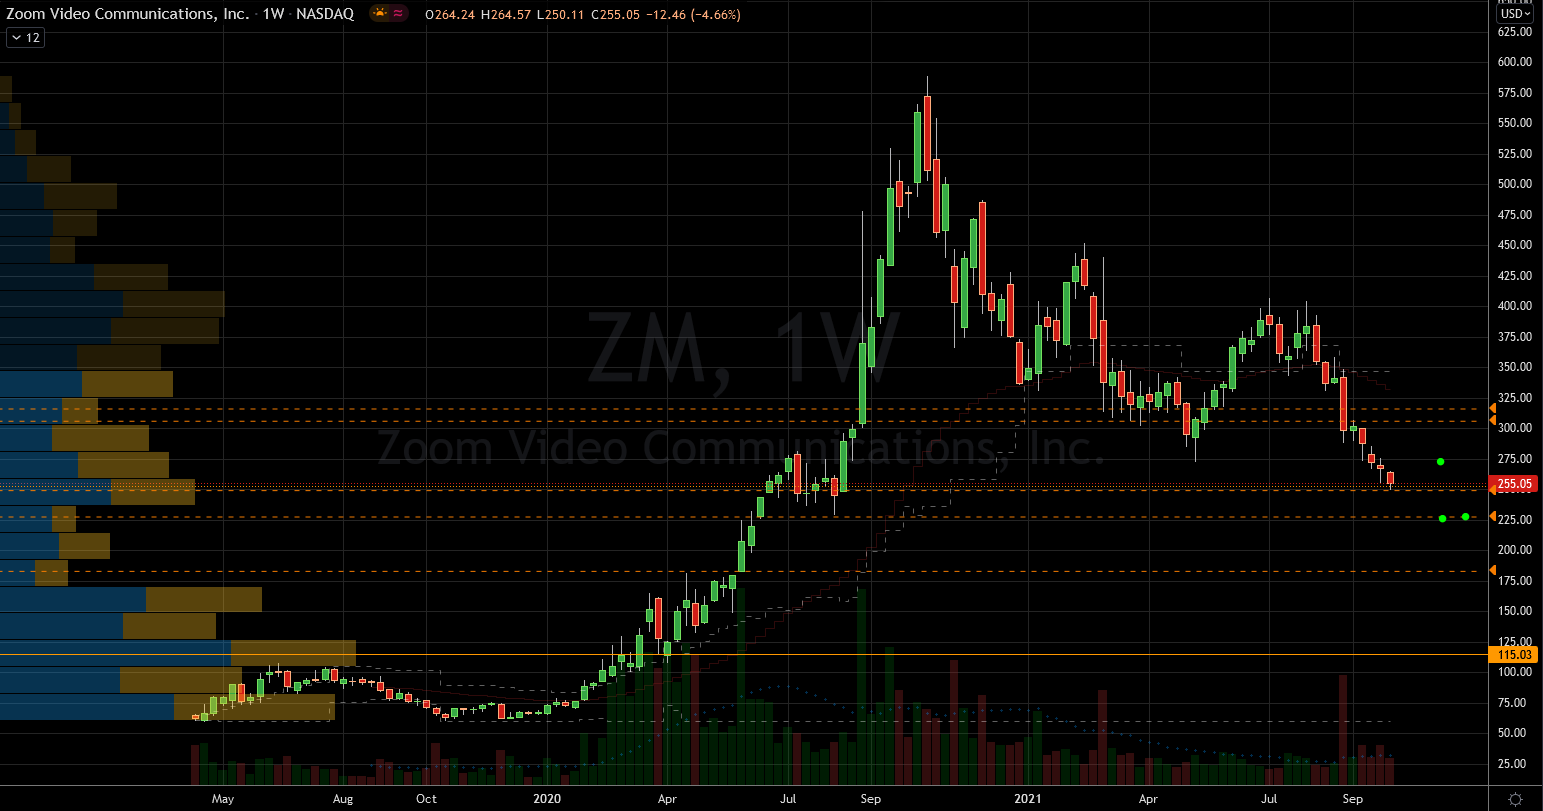 Stocks to Buy: Zoom Video (ZM) Stock Chart Showing Potential Base